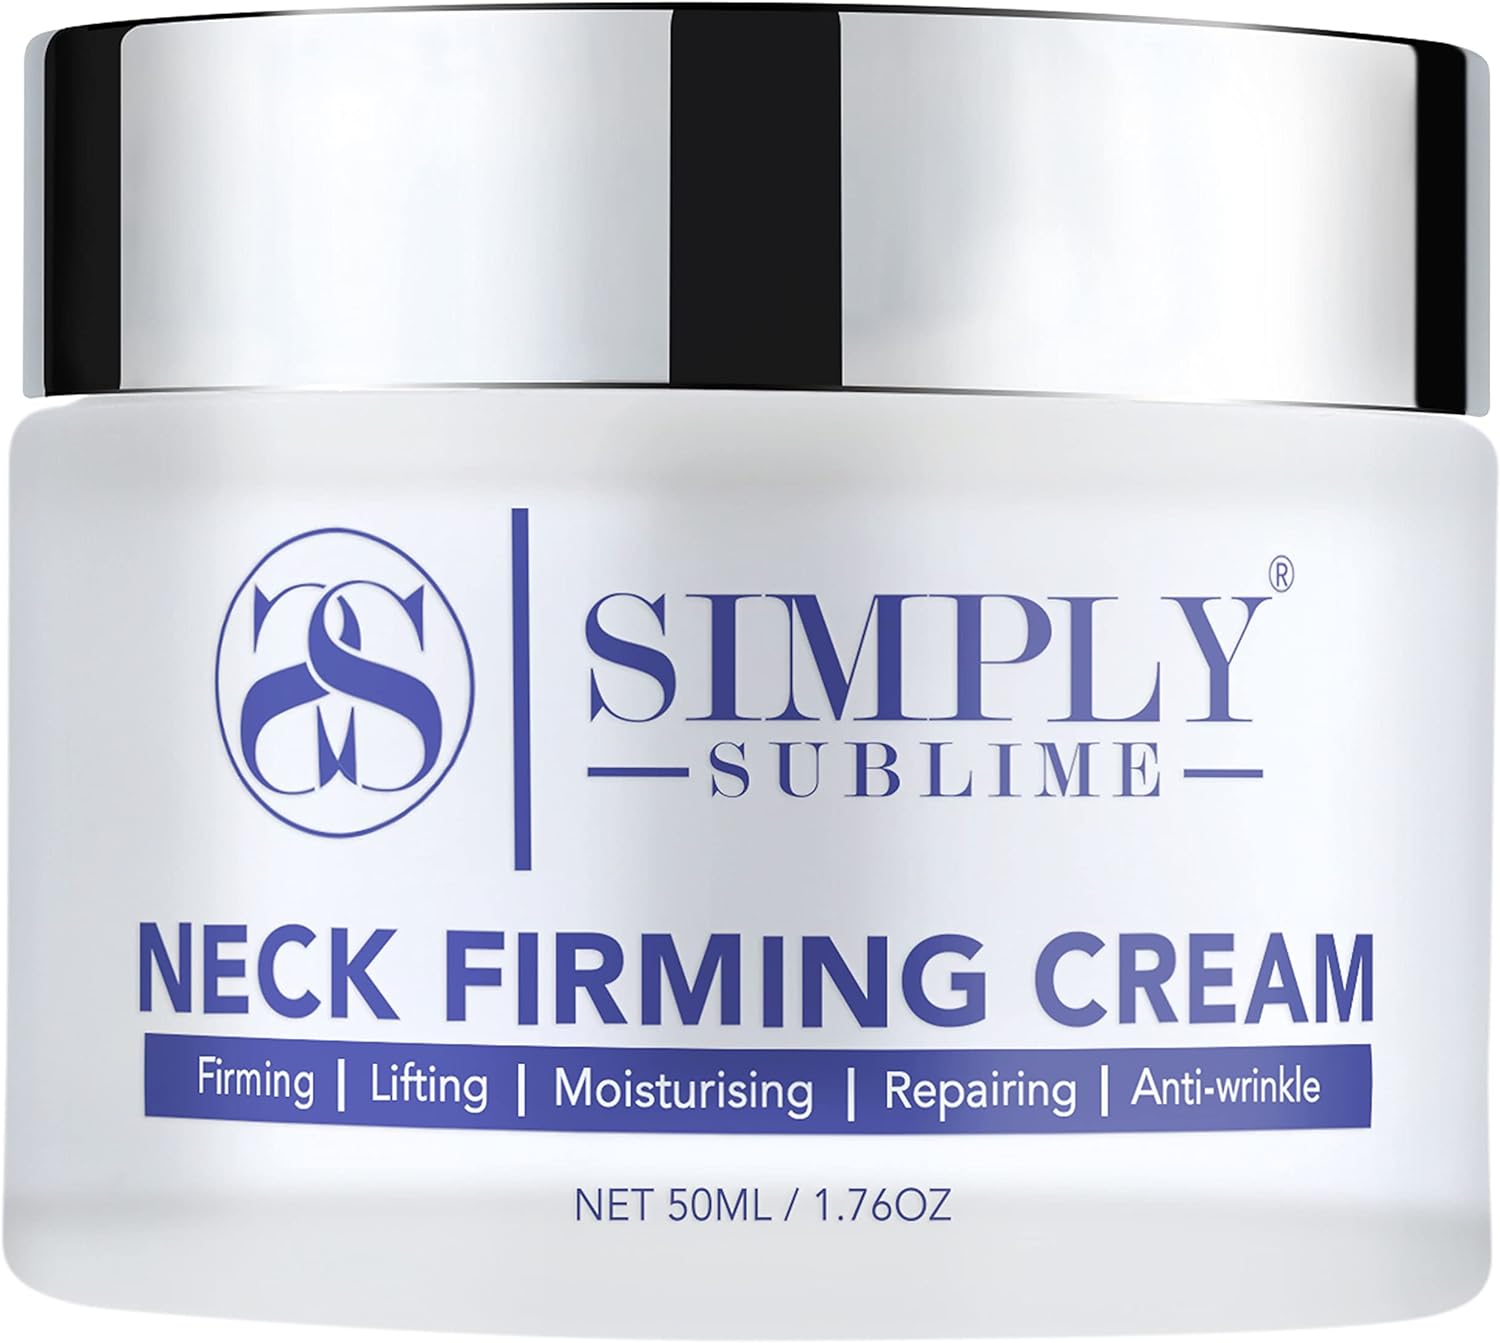 https://store.approvedfood.co.uk/assets/fbimg/src_images/simply_sublime_neck_firming_cream_47ml.jpg